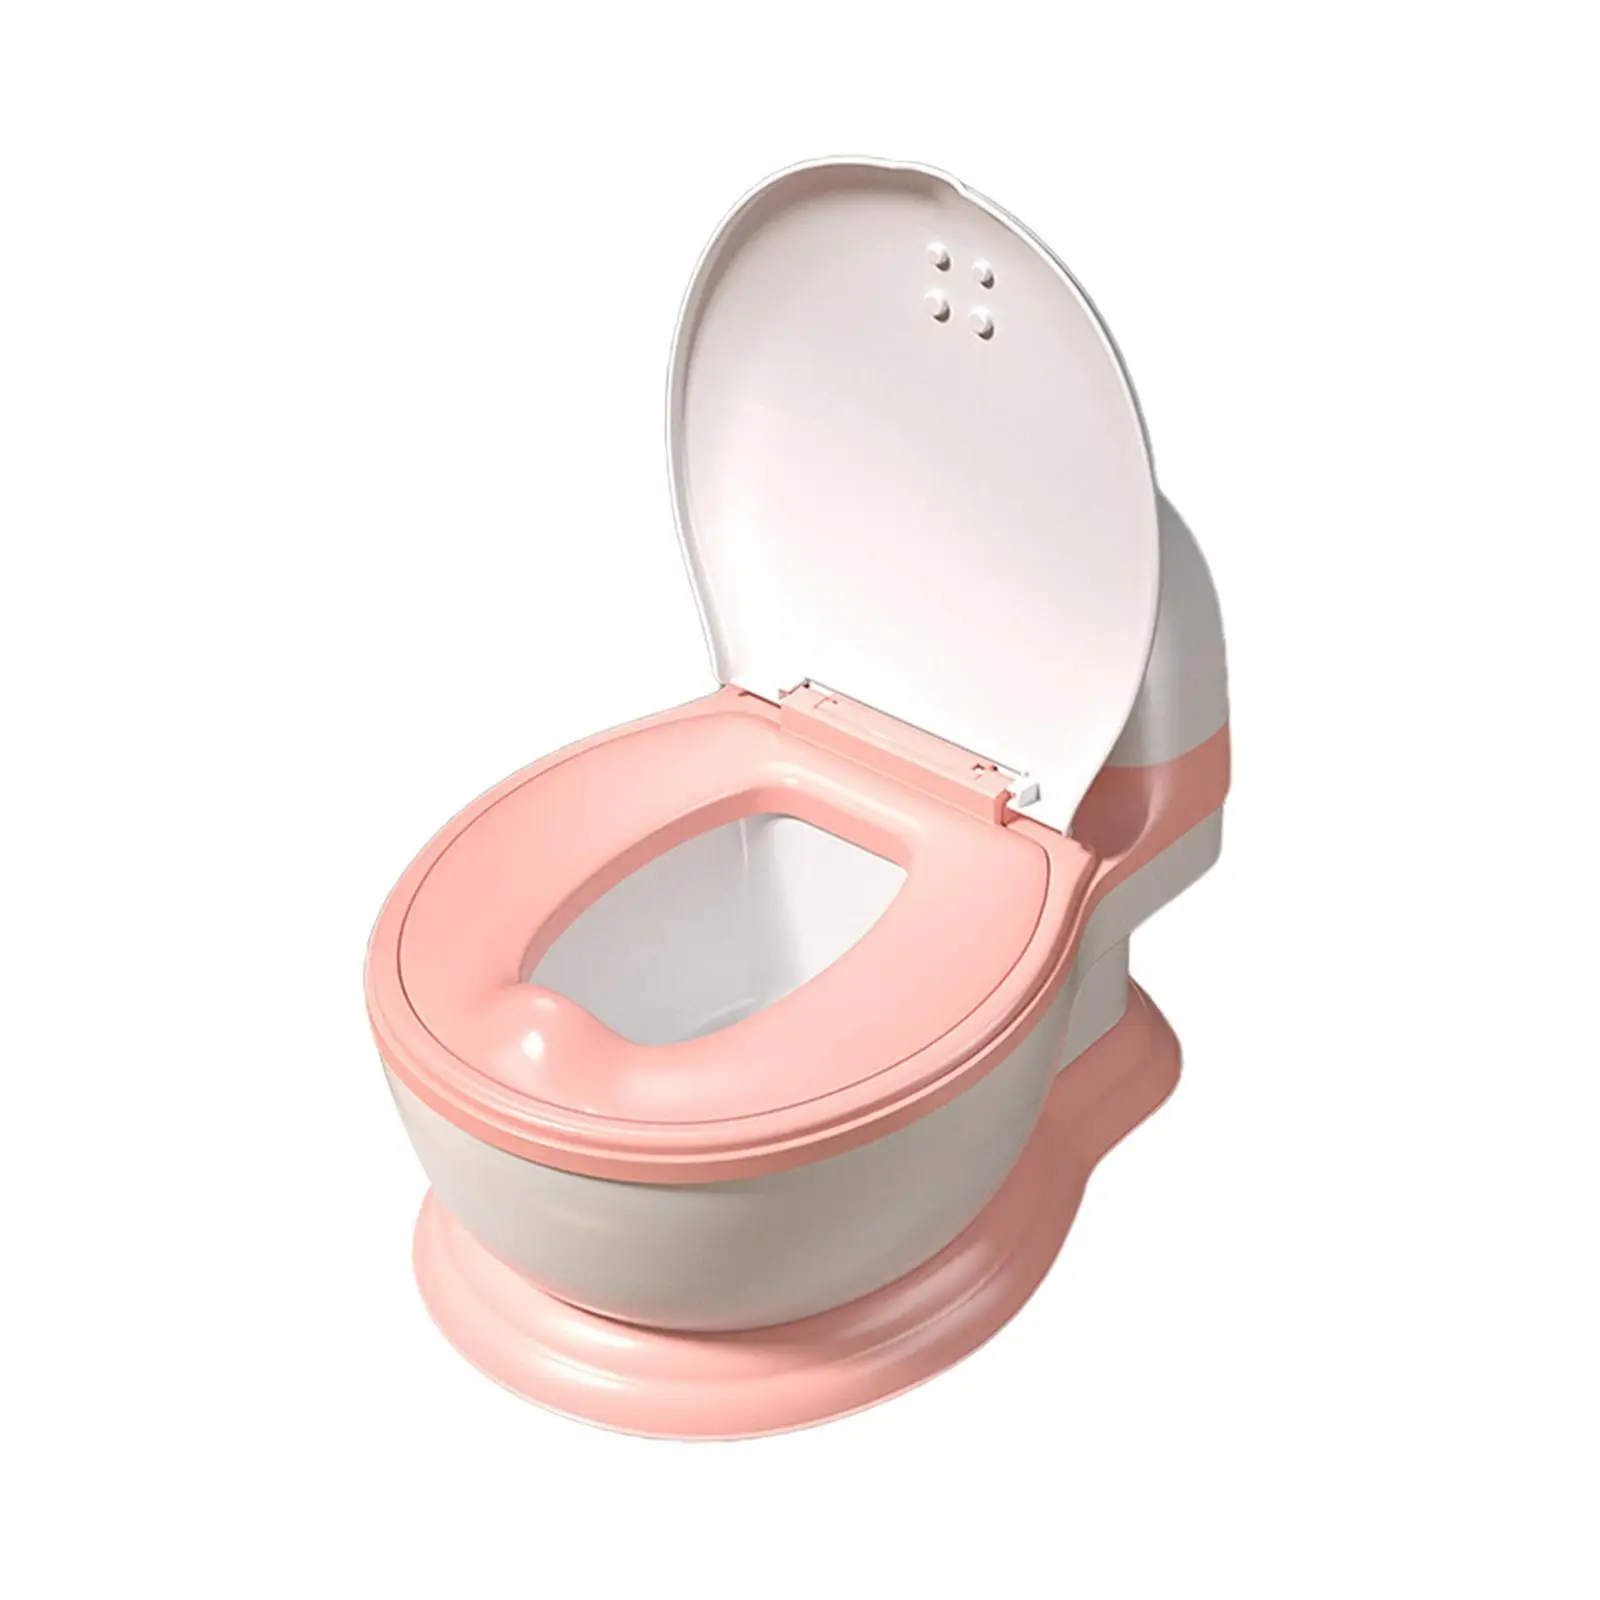 Real Feel Potty Removable Travel Toddlers Potty Chair Training Transition Potty Seat for Bedroom Kindergarten Outdoor Hotel Baby